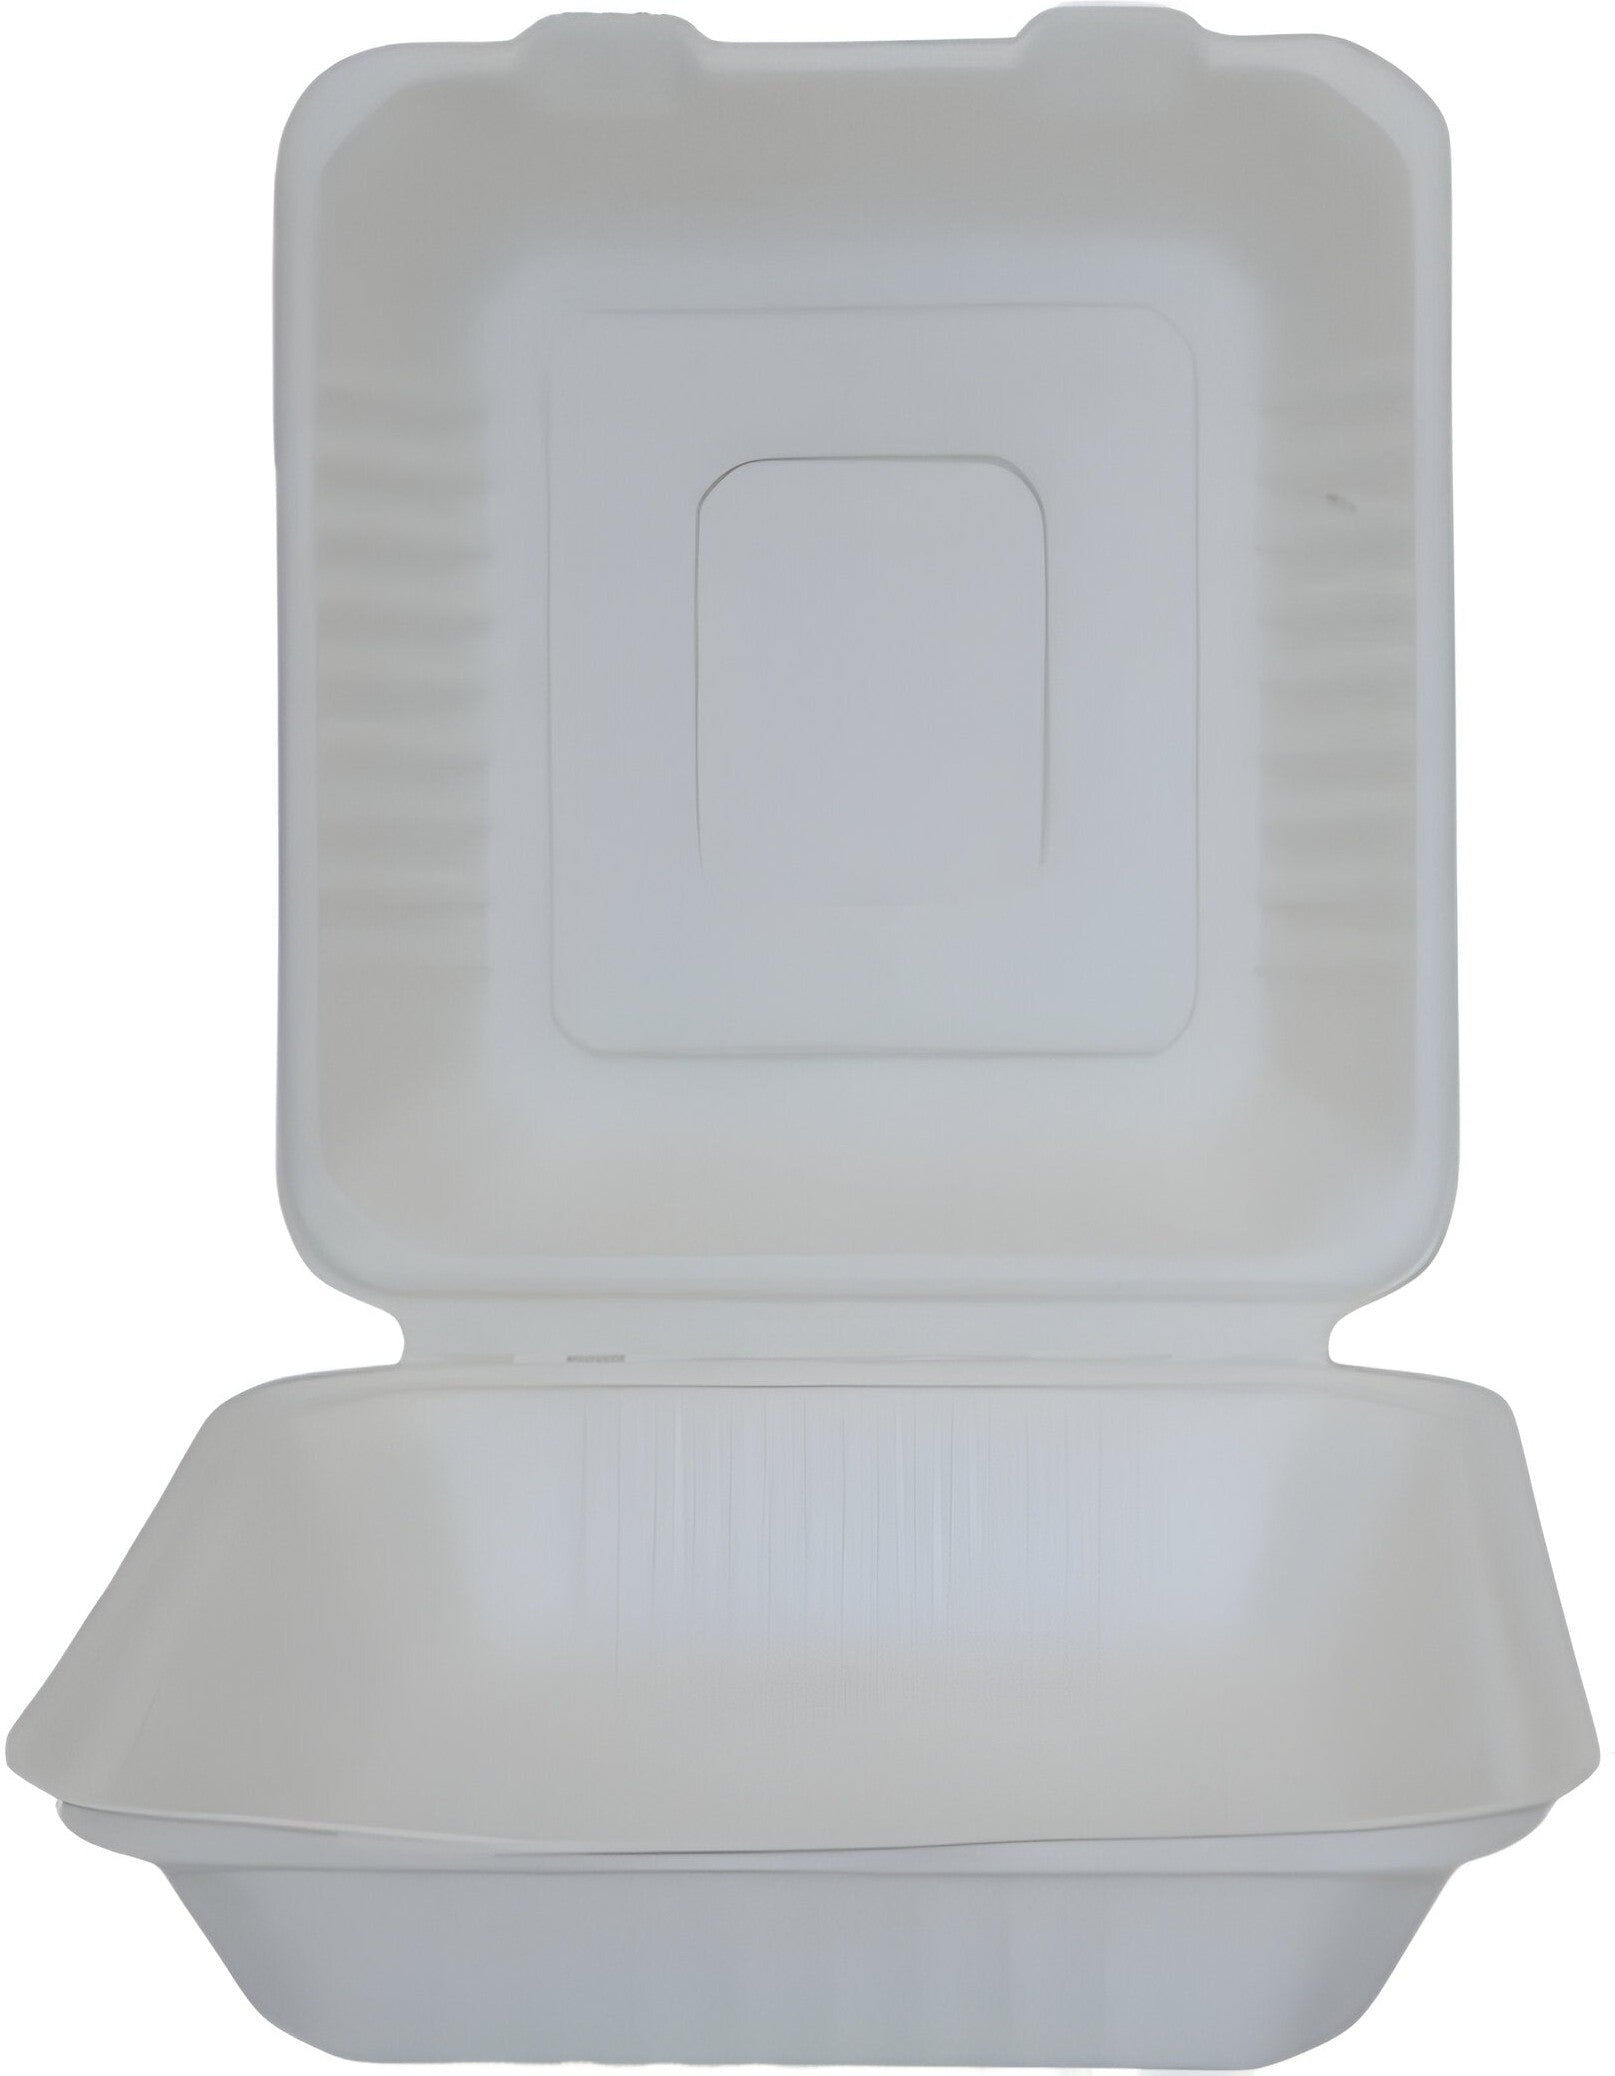 RiteEarth - 8" x 8.7" Bagasse Hinged Container, 200/cs - H891